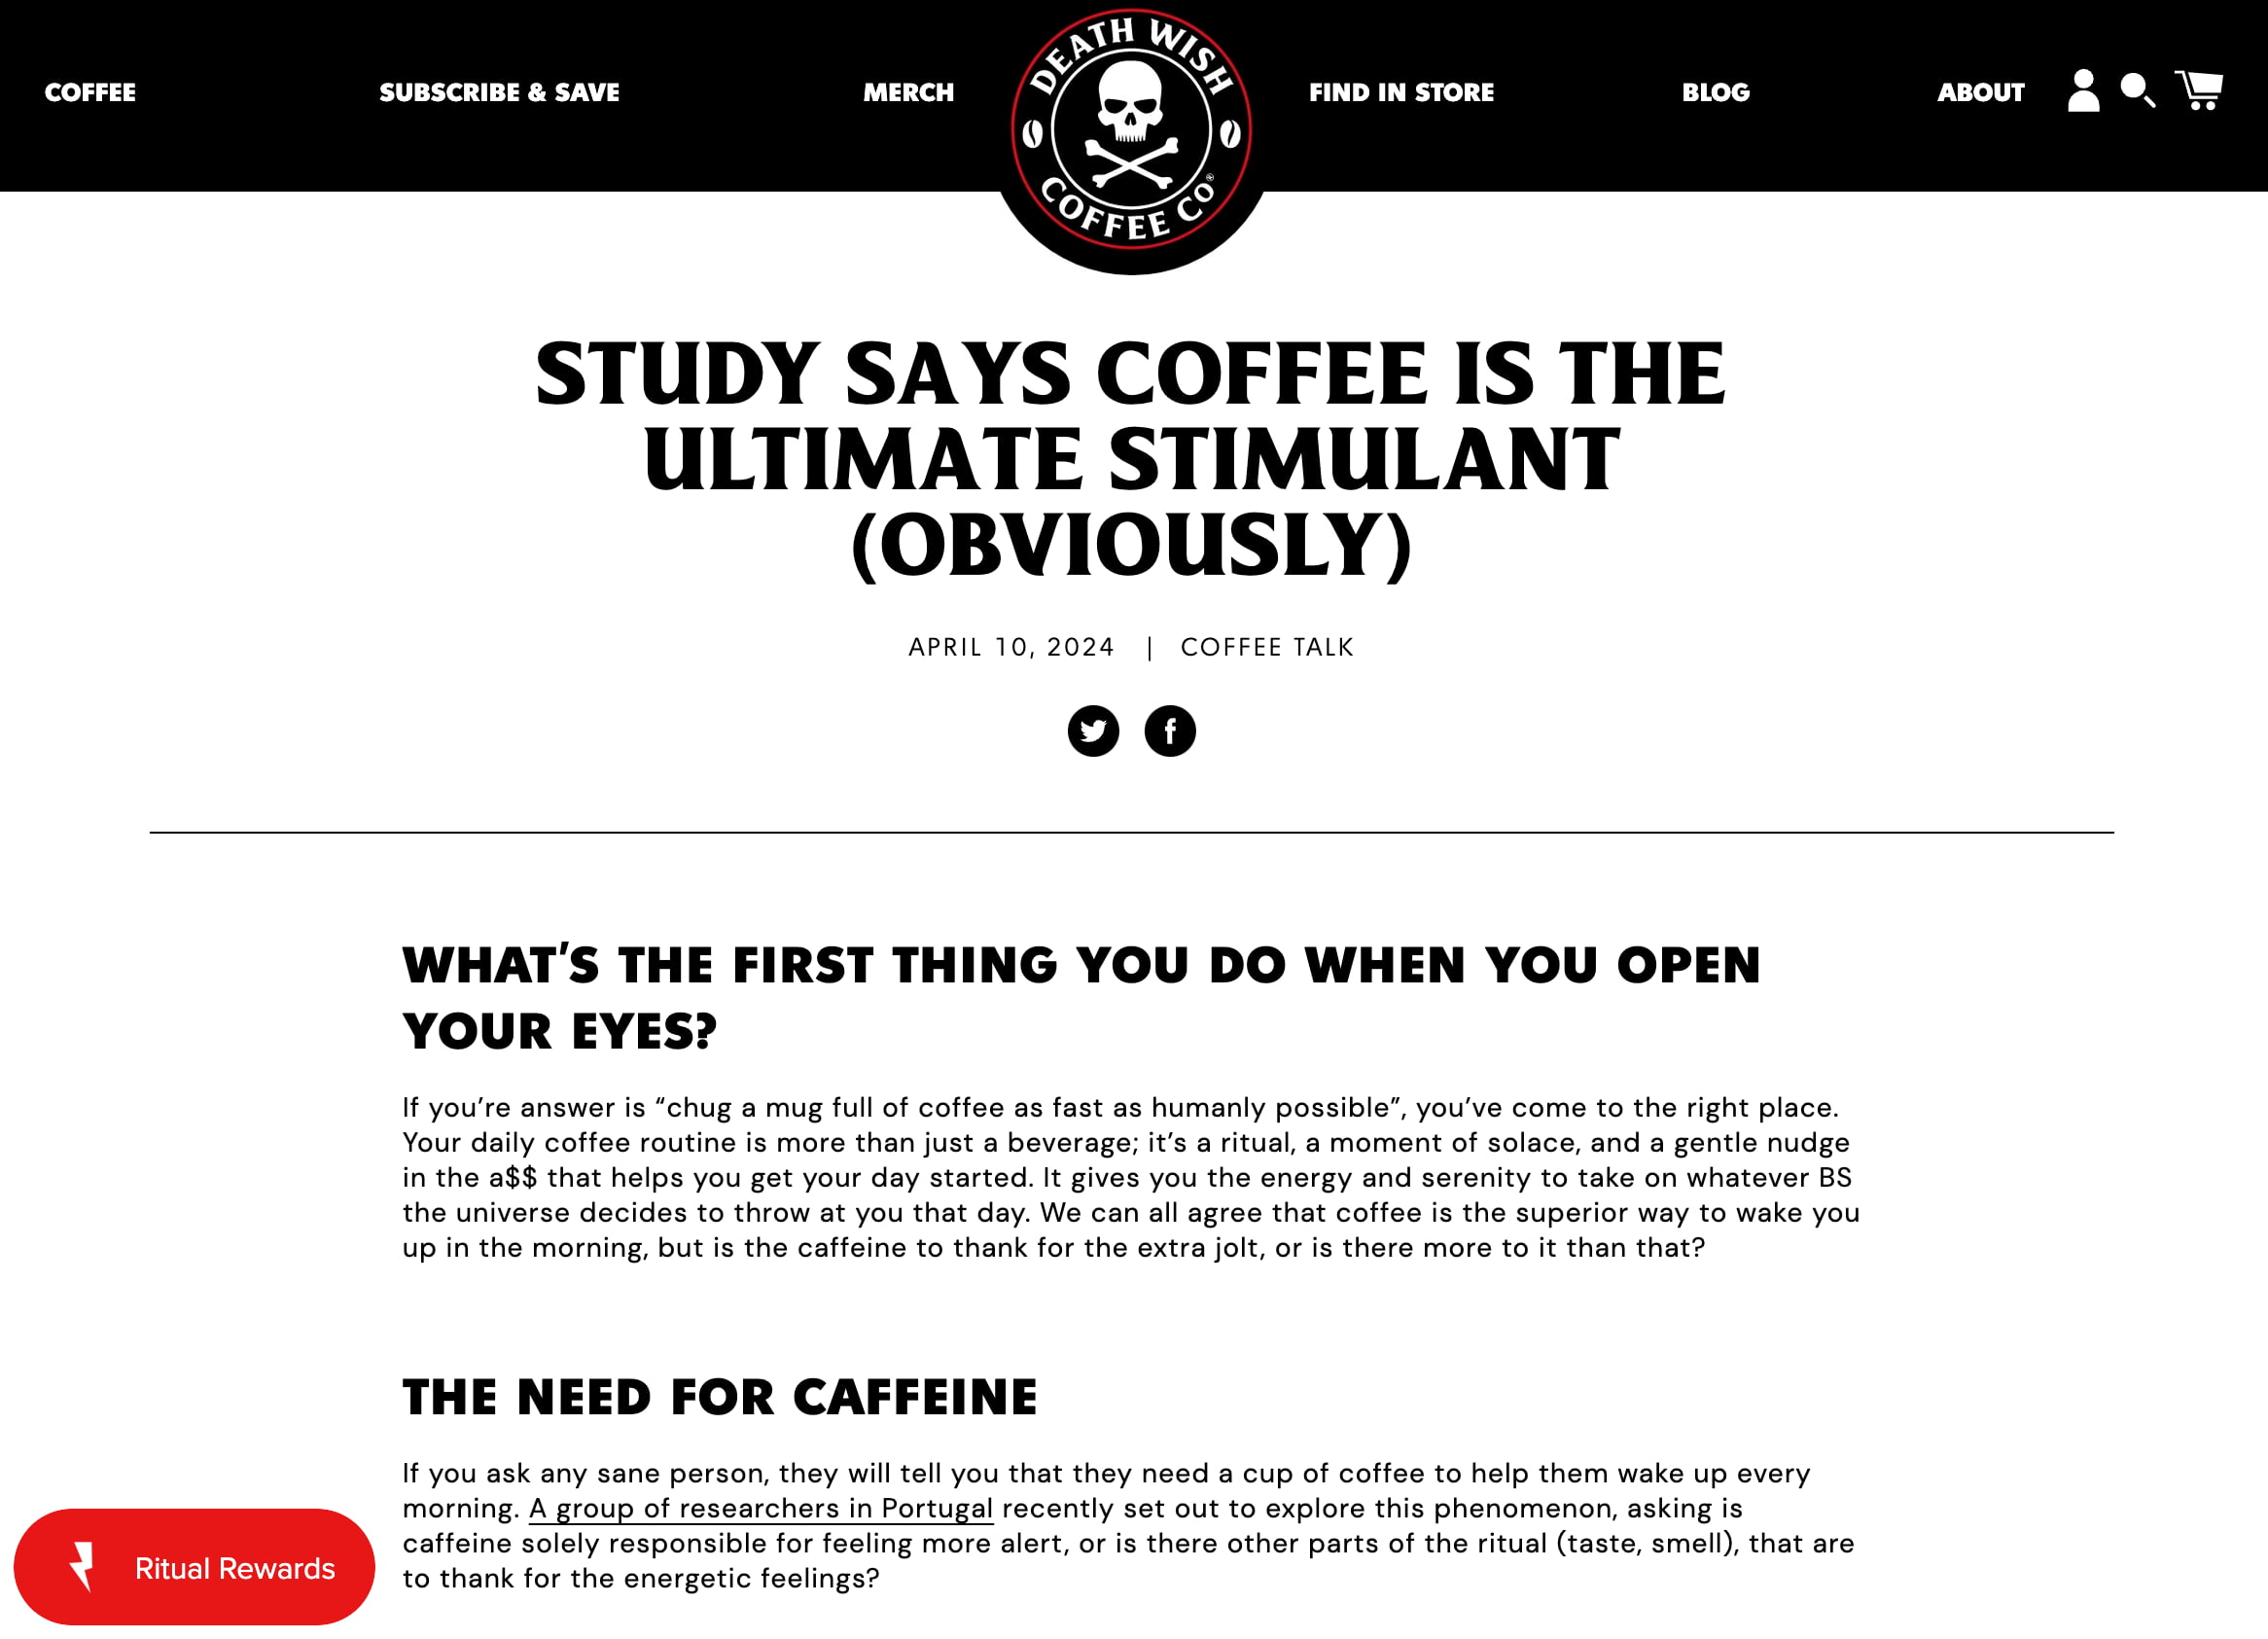 An example of a blog post on the Death Wish Coffee Shopify blog